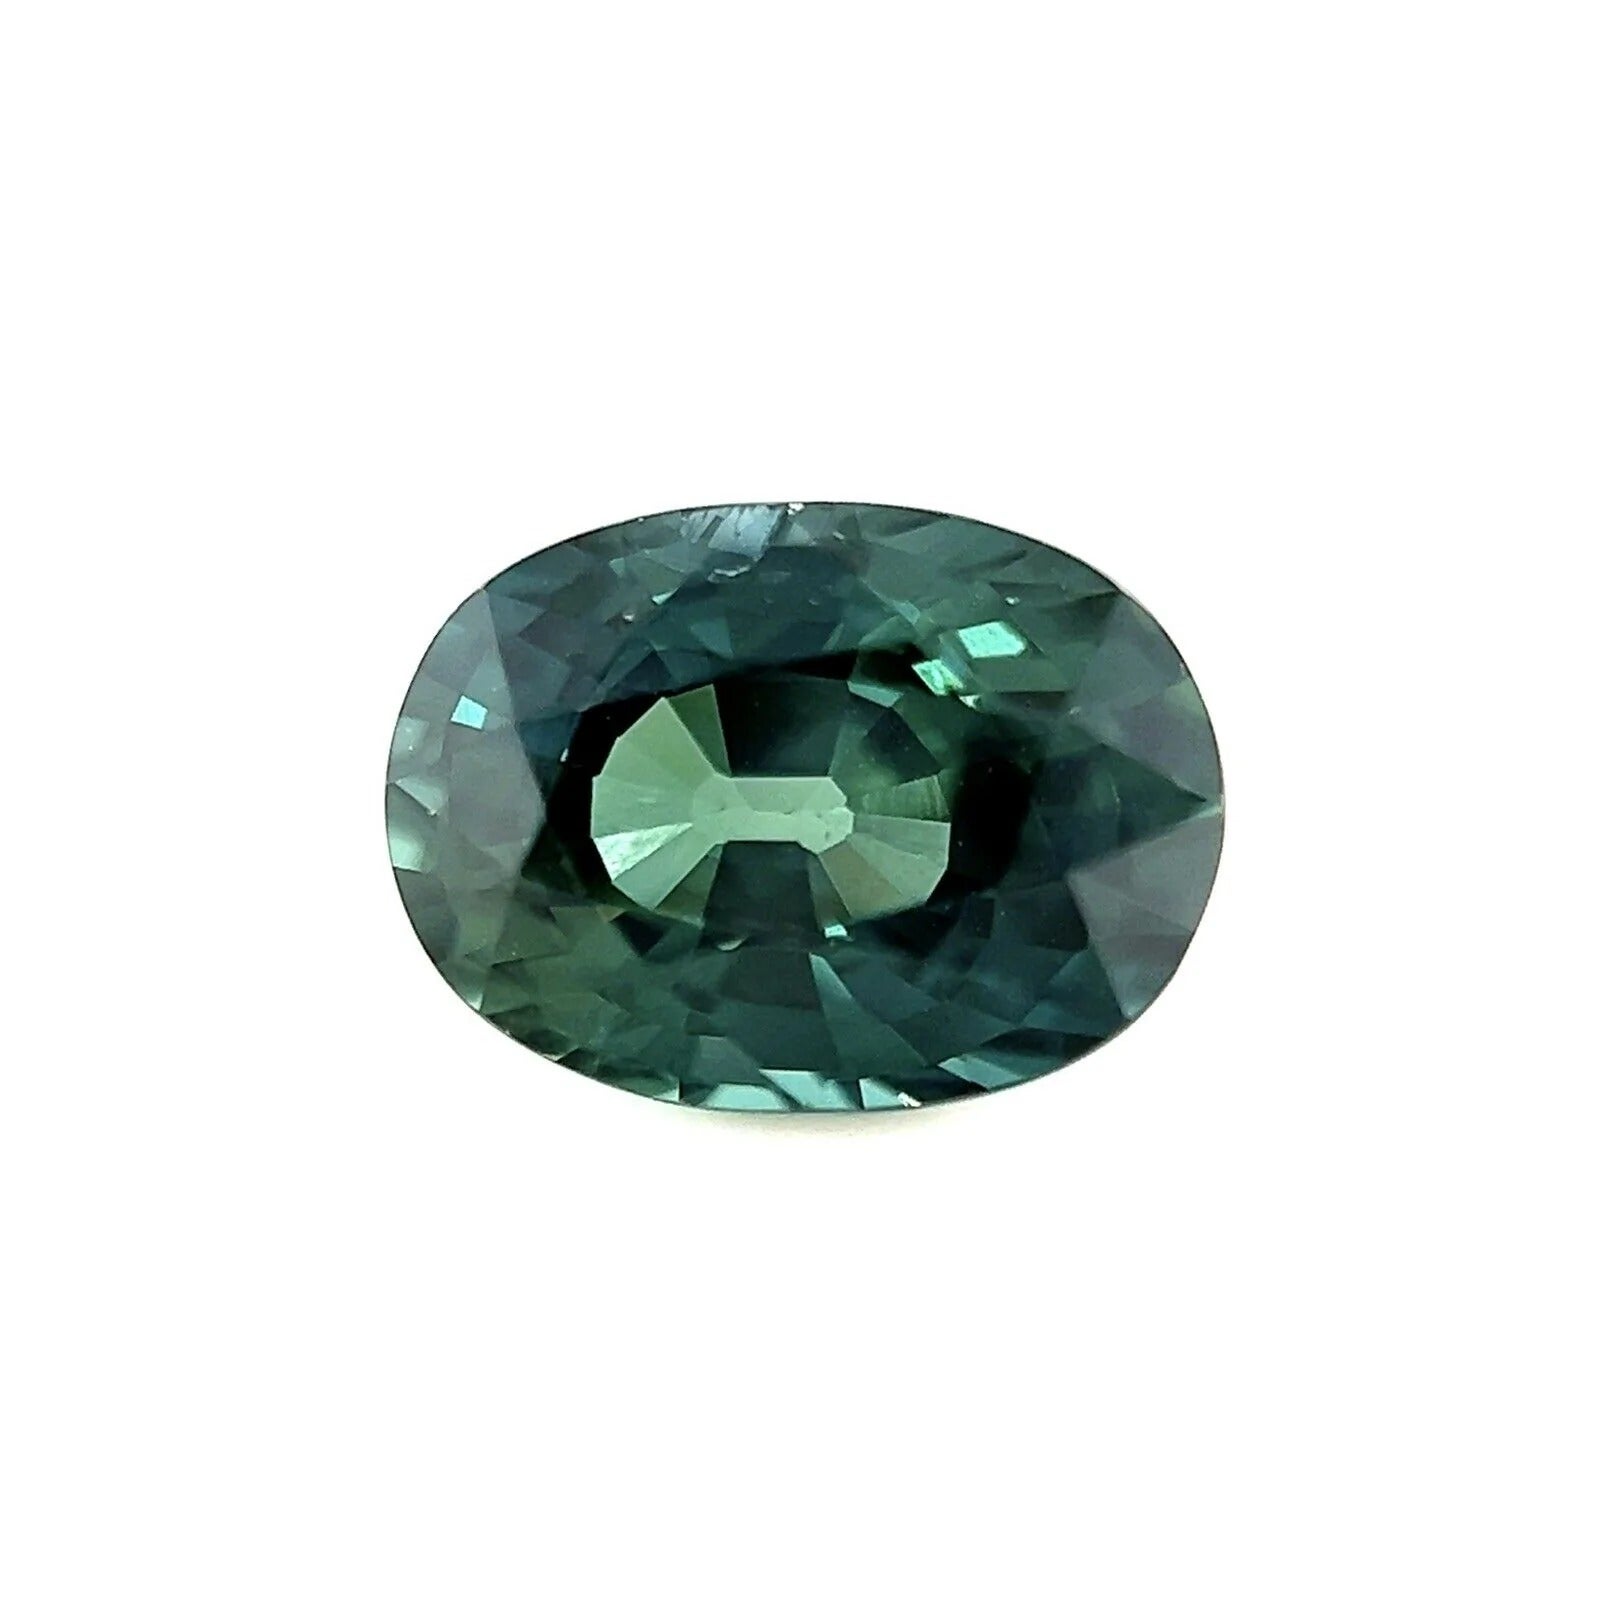 1.00ct Sapphire GIA Certified Untreated Vivid Green Blue Oval Cut Unheated Rare